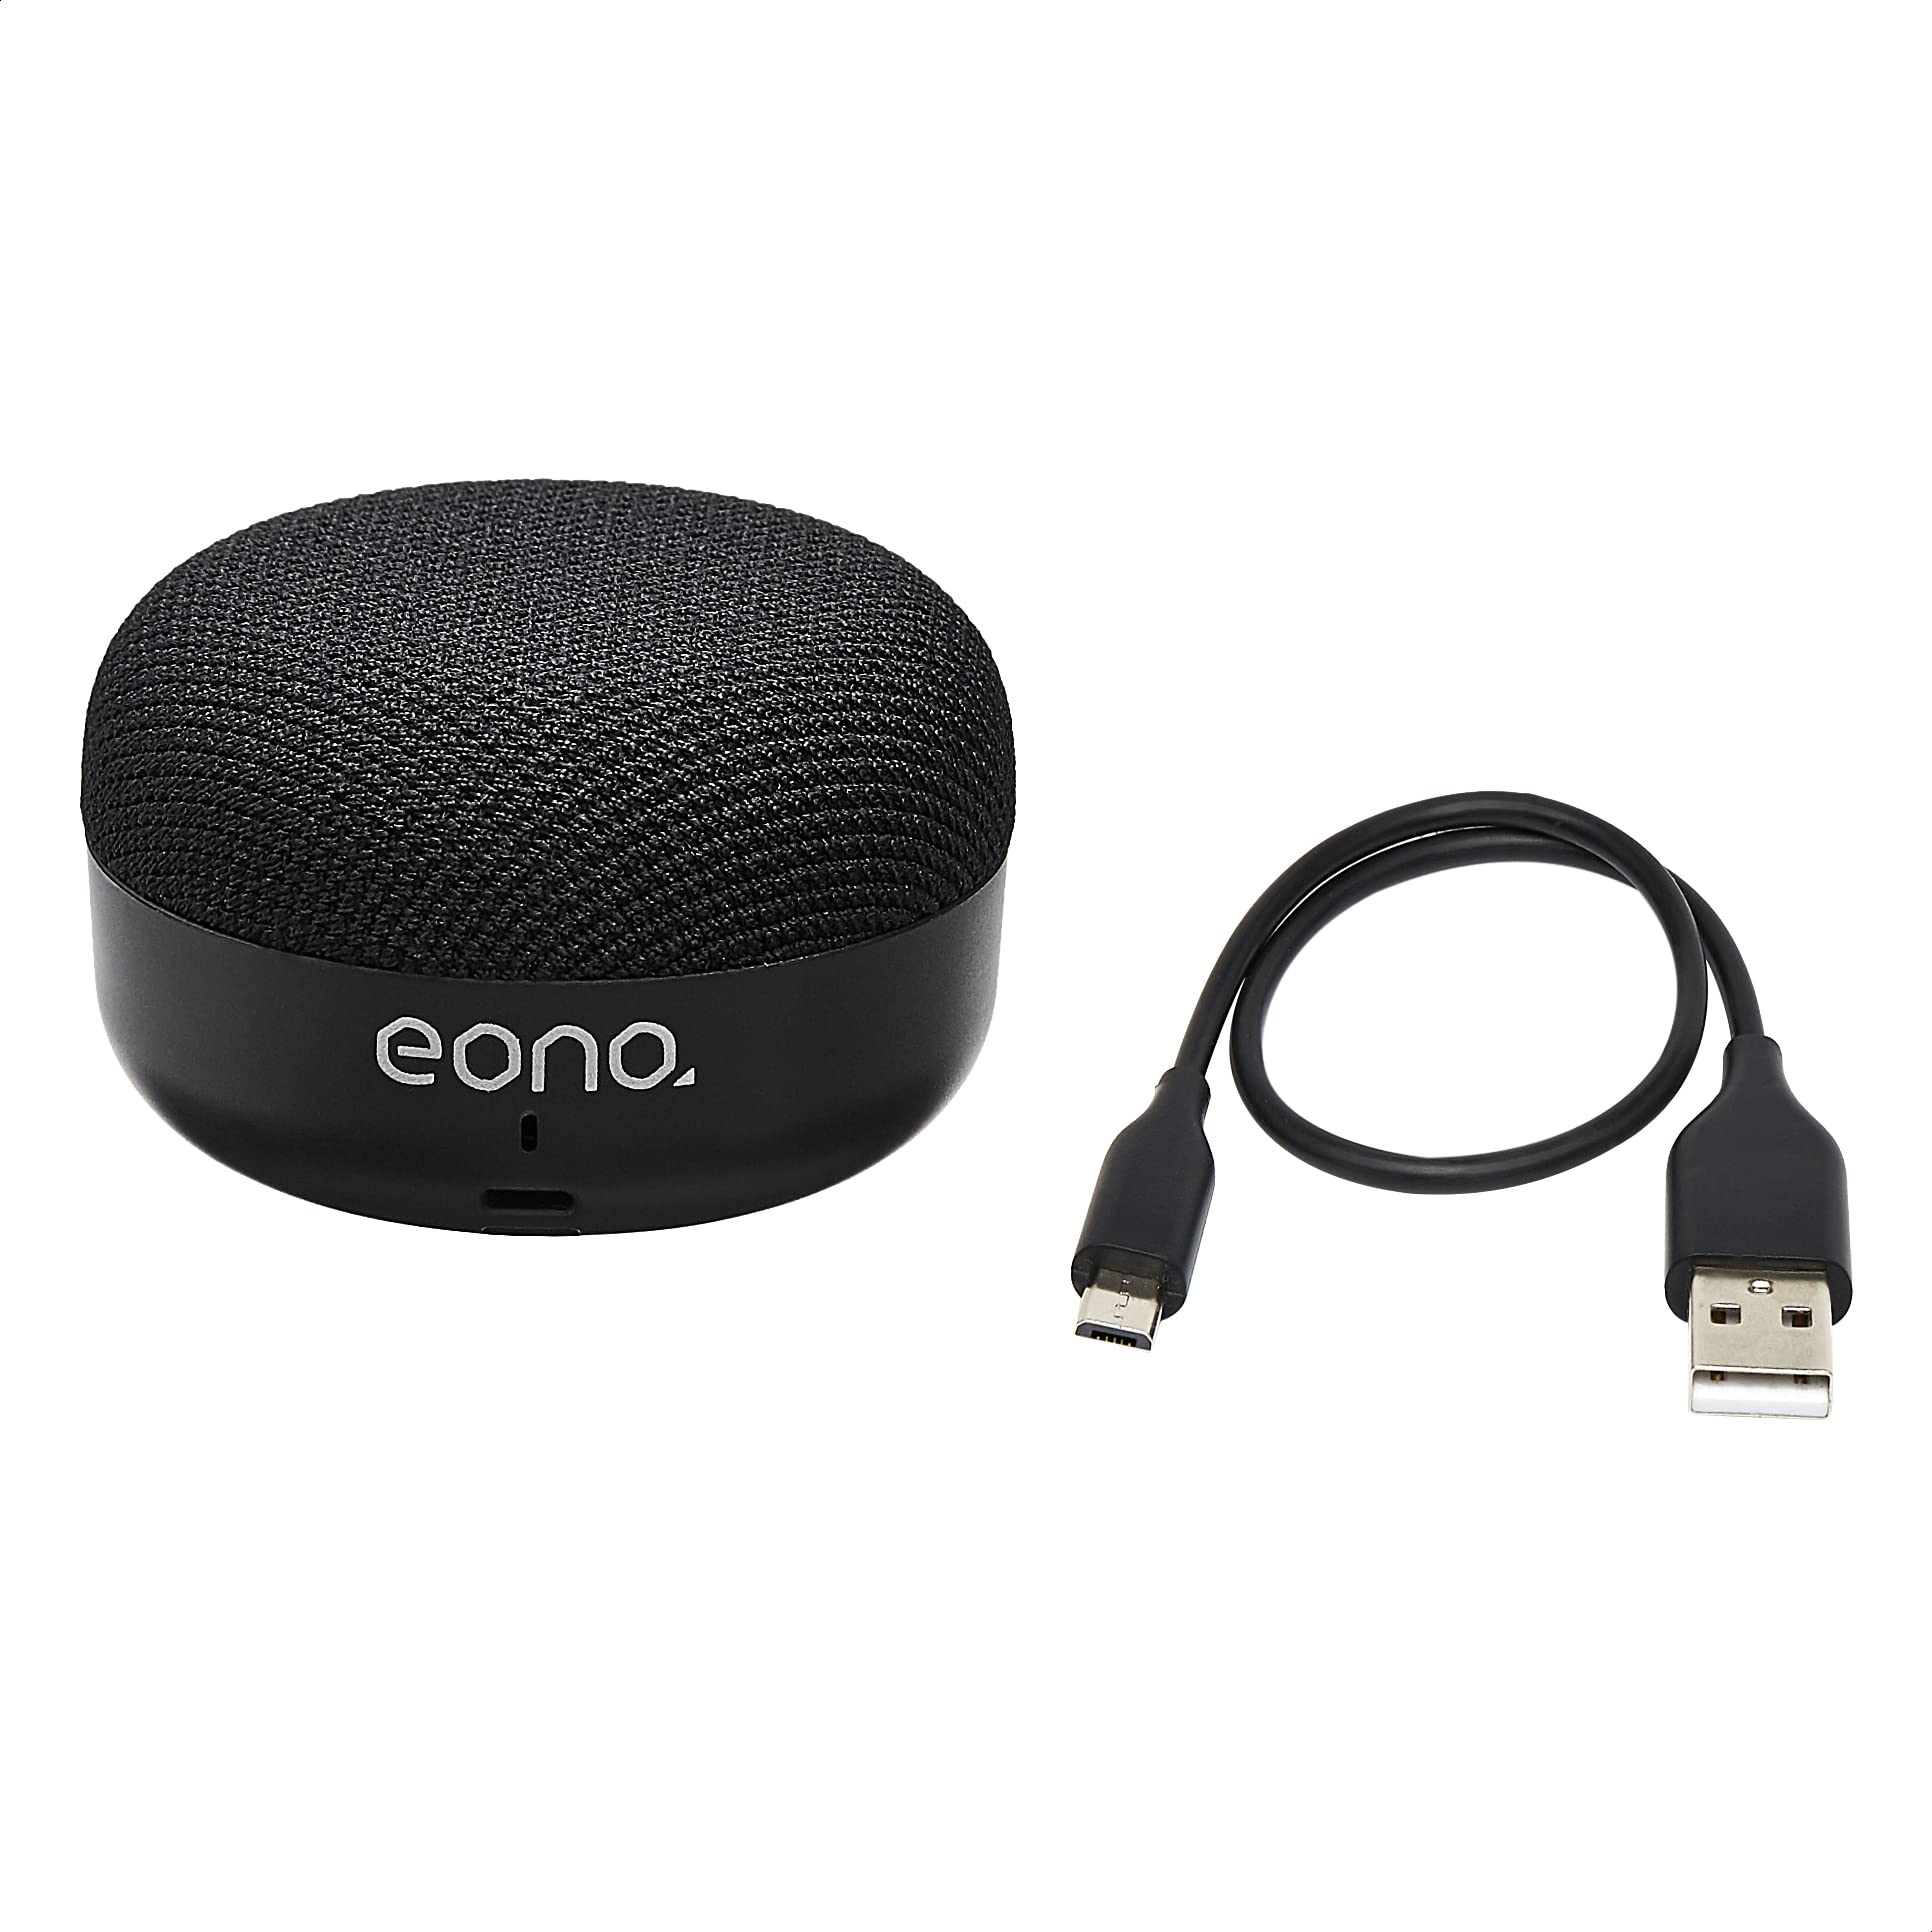 Eono by Amazon - Super Portable Bluetooth Compact Speaker with HARMAN Sound Technology, 5 Hours of Playtime, Built-In Microphone, Deep Bass Sound, Google and Siri Compatible, Multi-Point Connection